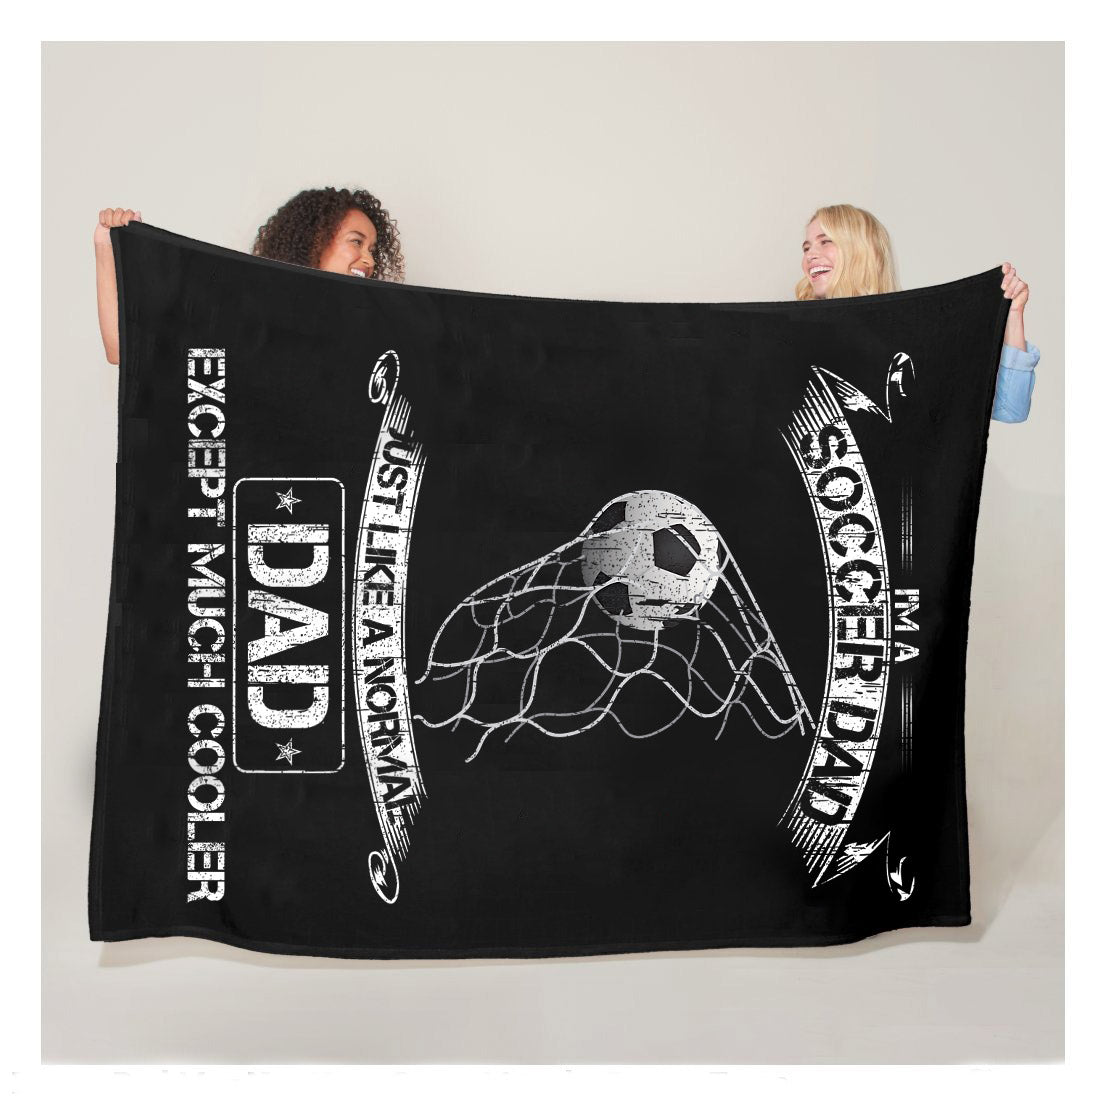 Im A Soccer Dad Just Like A Normal Dad Except Much Cooler Fleece Blanket,  Soccer Blankets, Soccer Gifts, Happy Fathers Day Gift Ideas For Dad